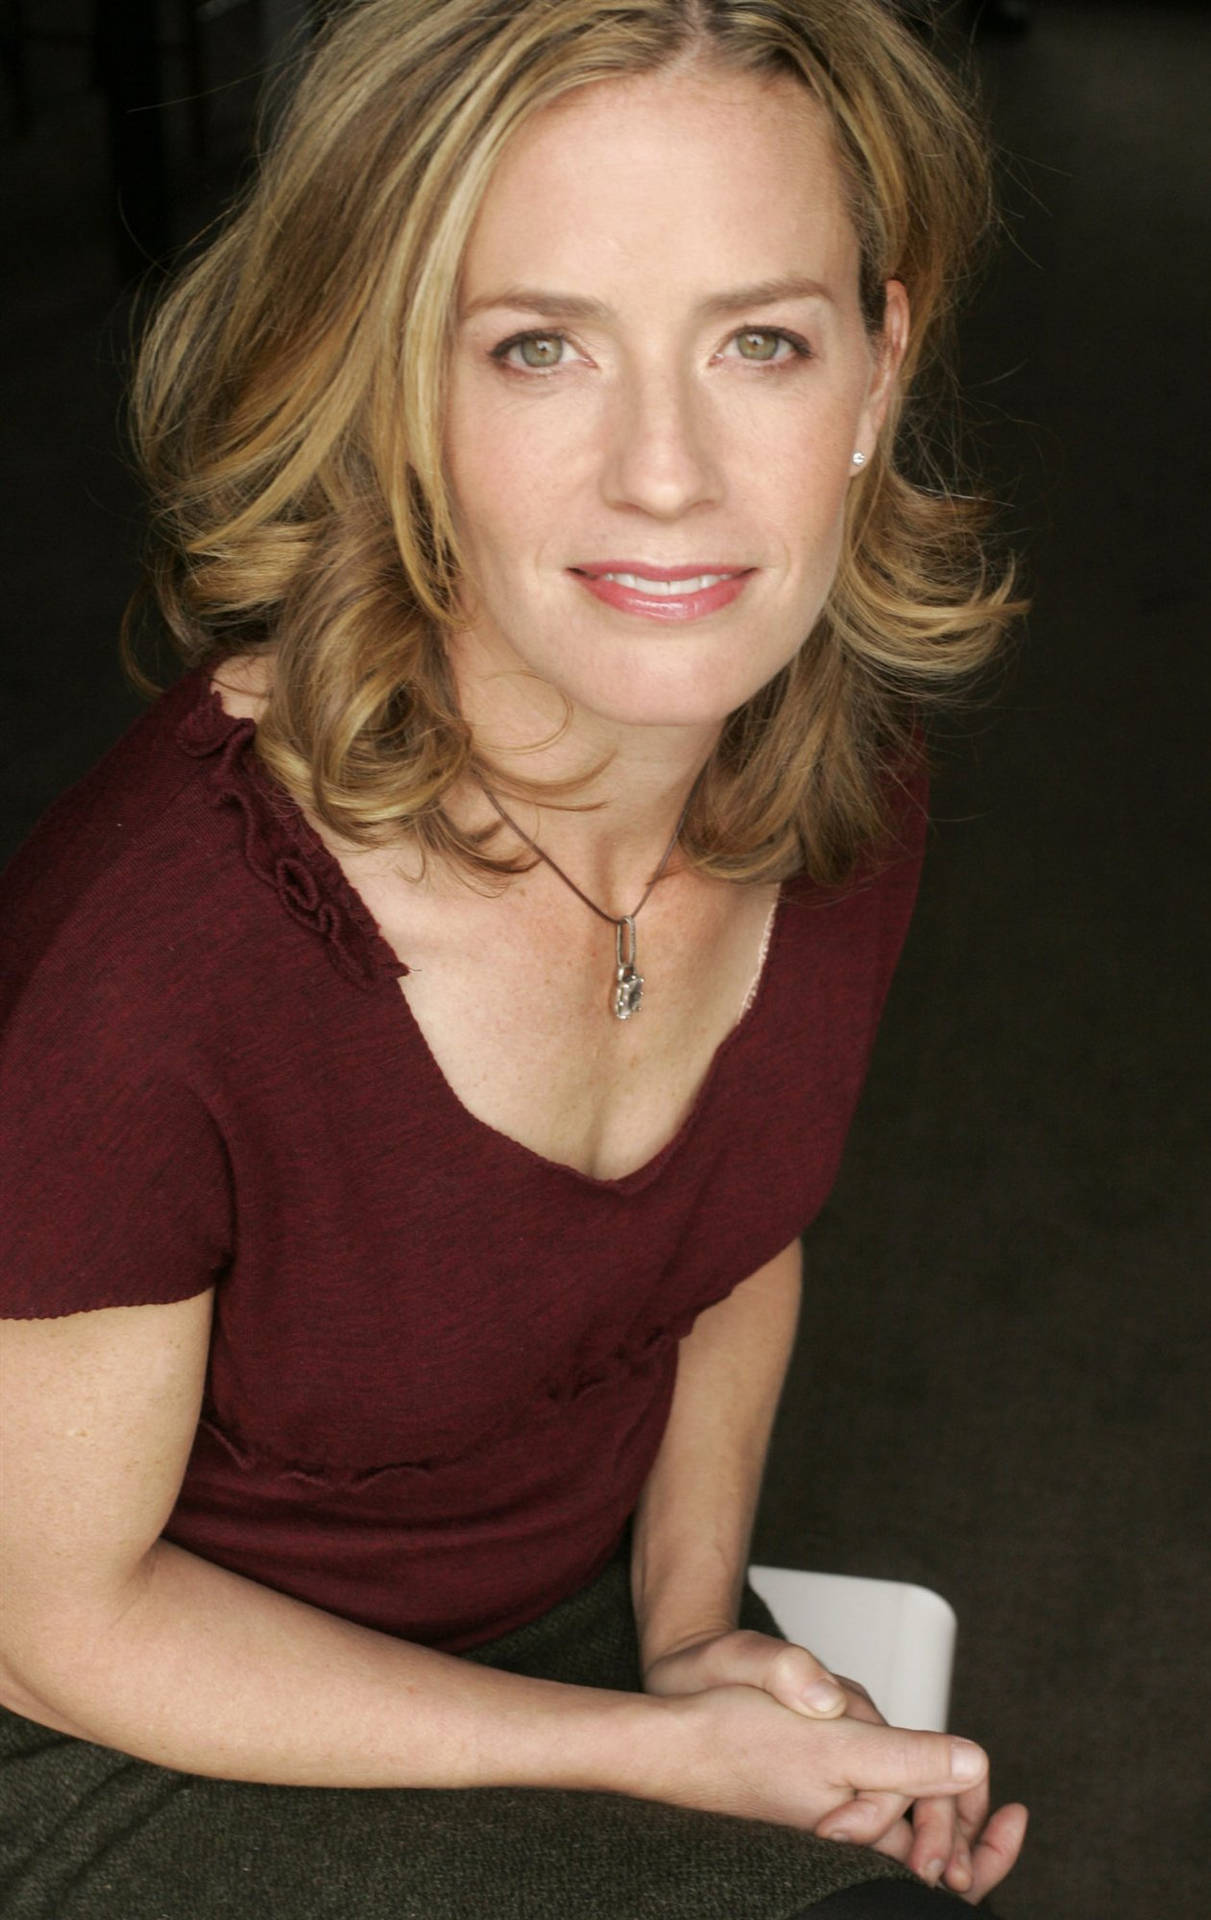 Download Elisabeth Shue Wearing Maroon Top With Both Hands On Lap Smiling  Wallpaper 